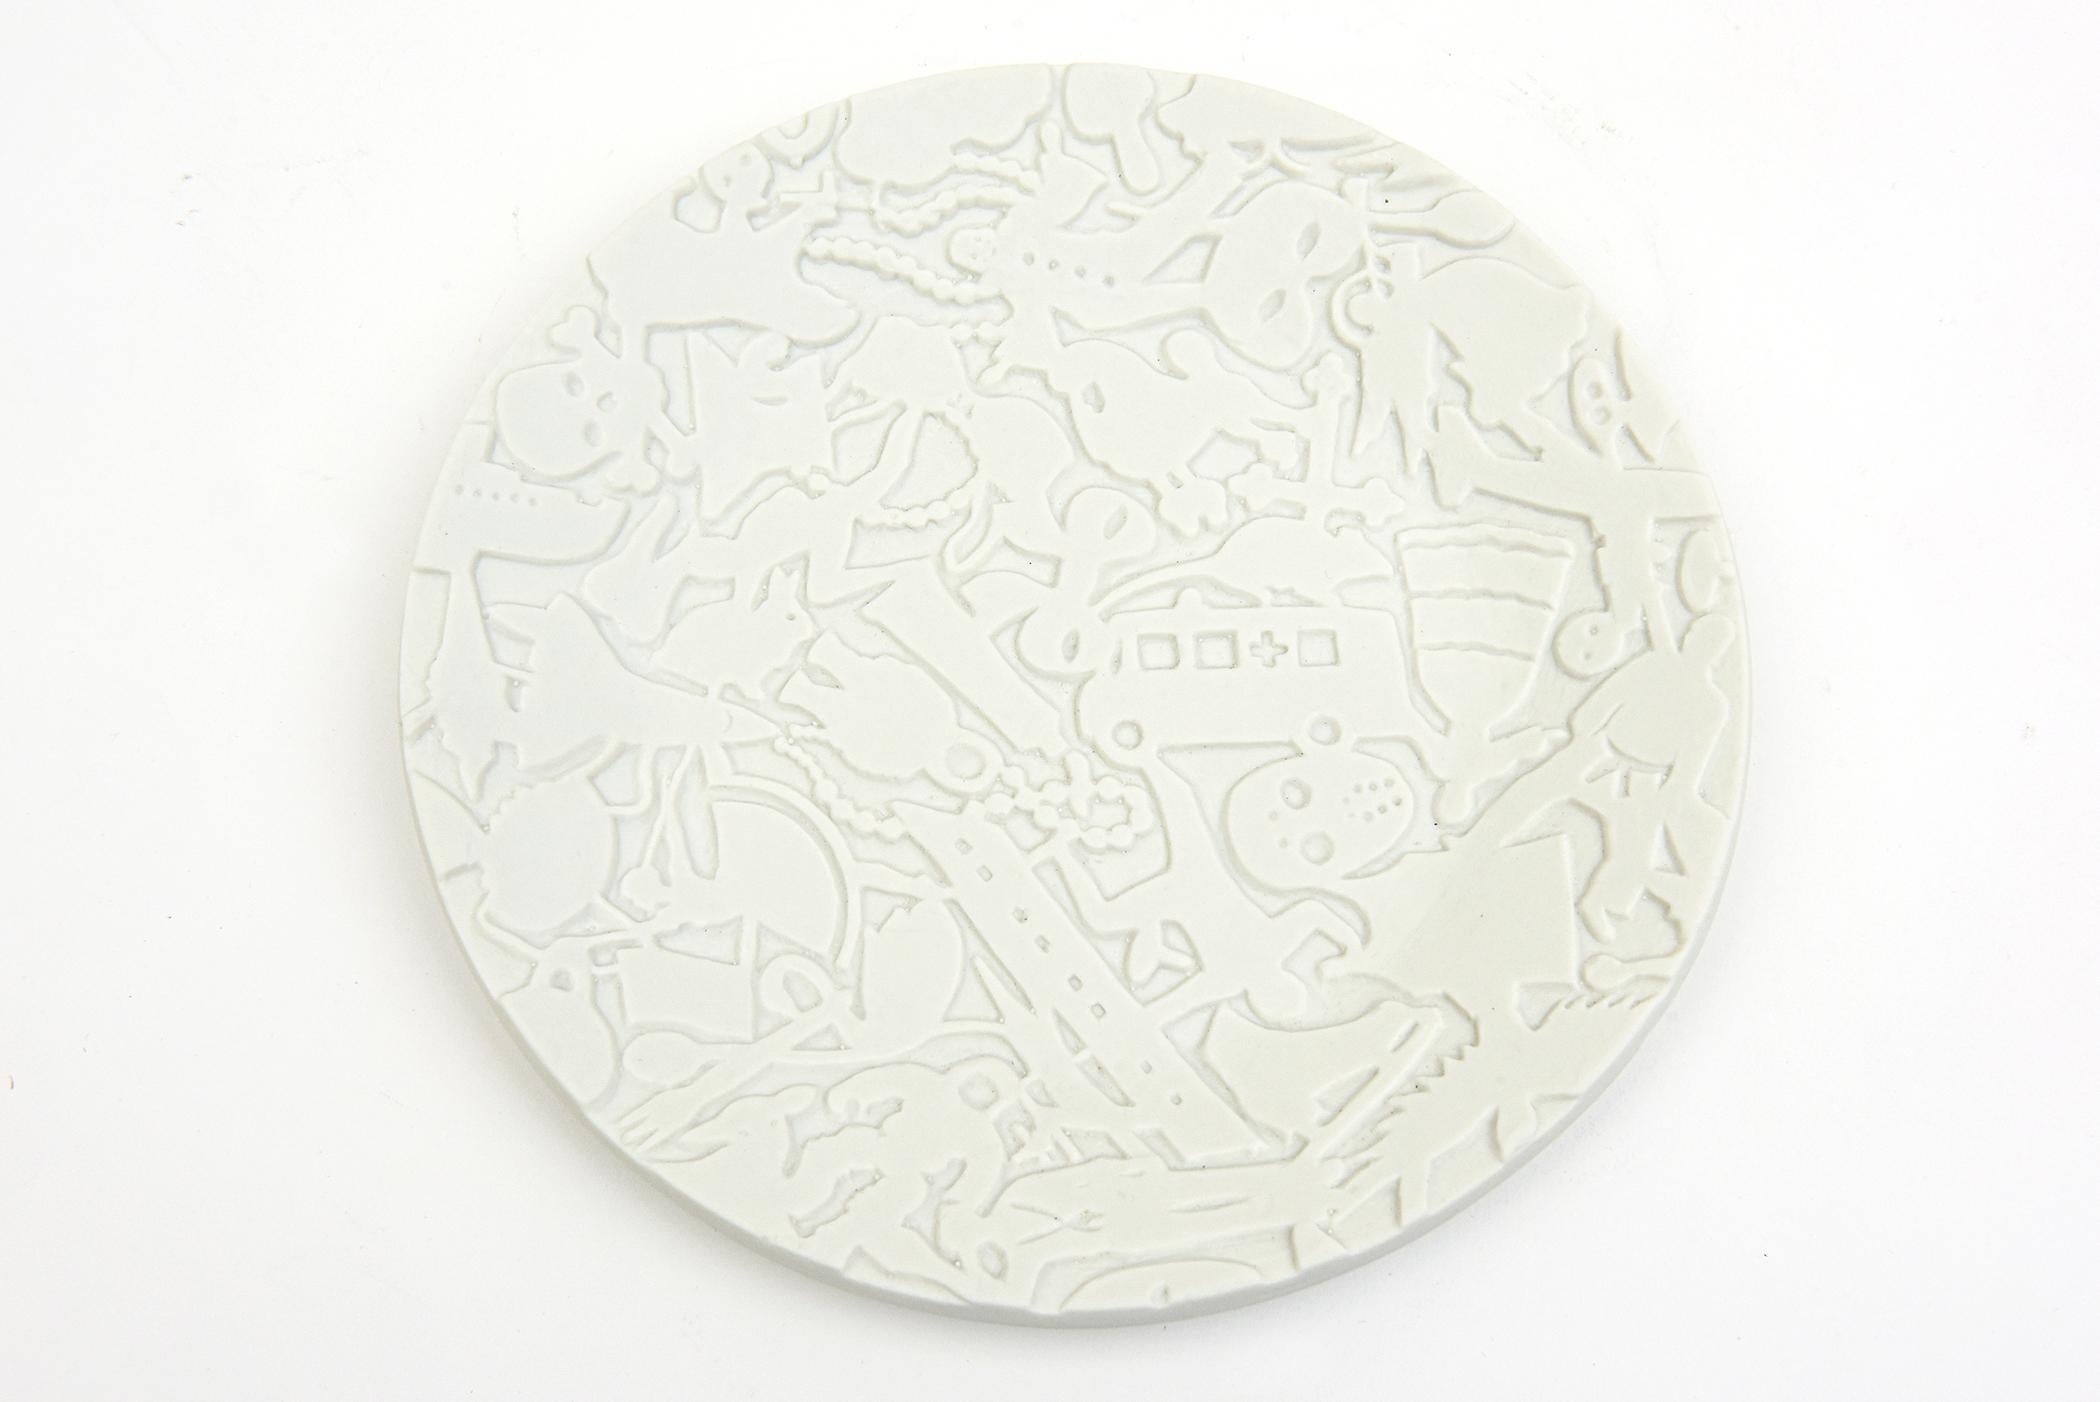 This amazing limited edition porcelain textural relief plate is a piece of art and sculpture with coded messages of things, objects and symbols all floating together on a white unglazed matte porcelain object plate. it is the work of Studio Job from